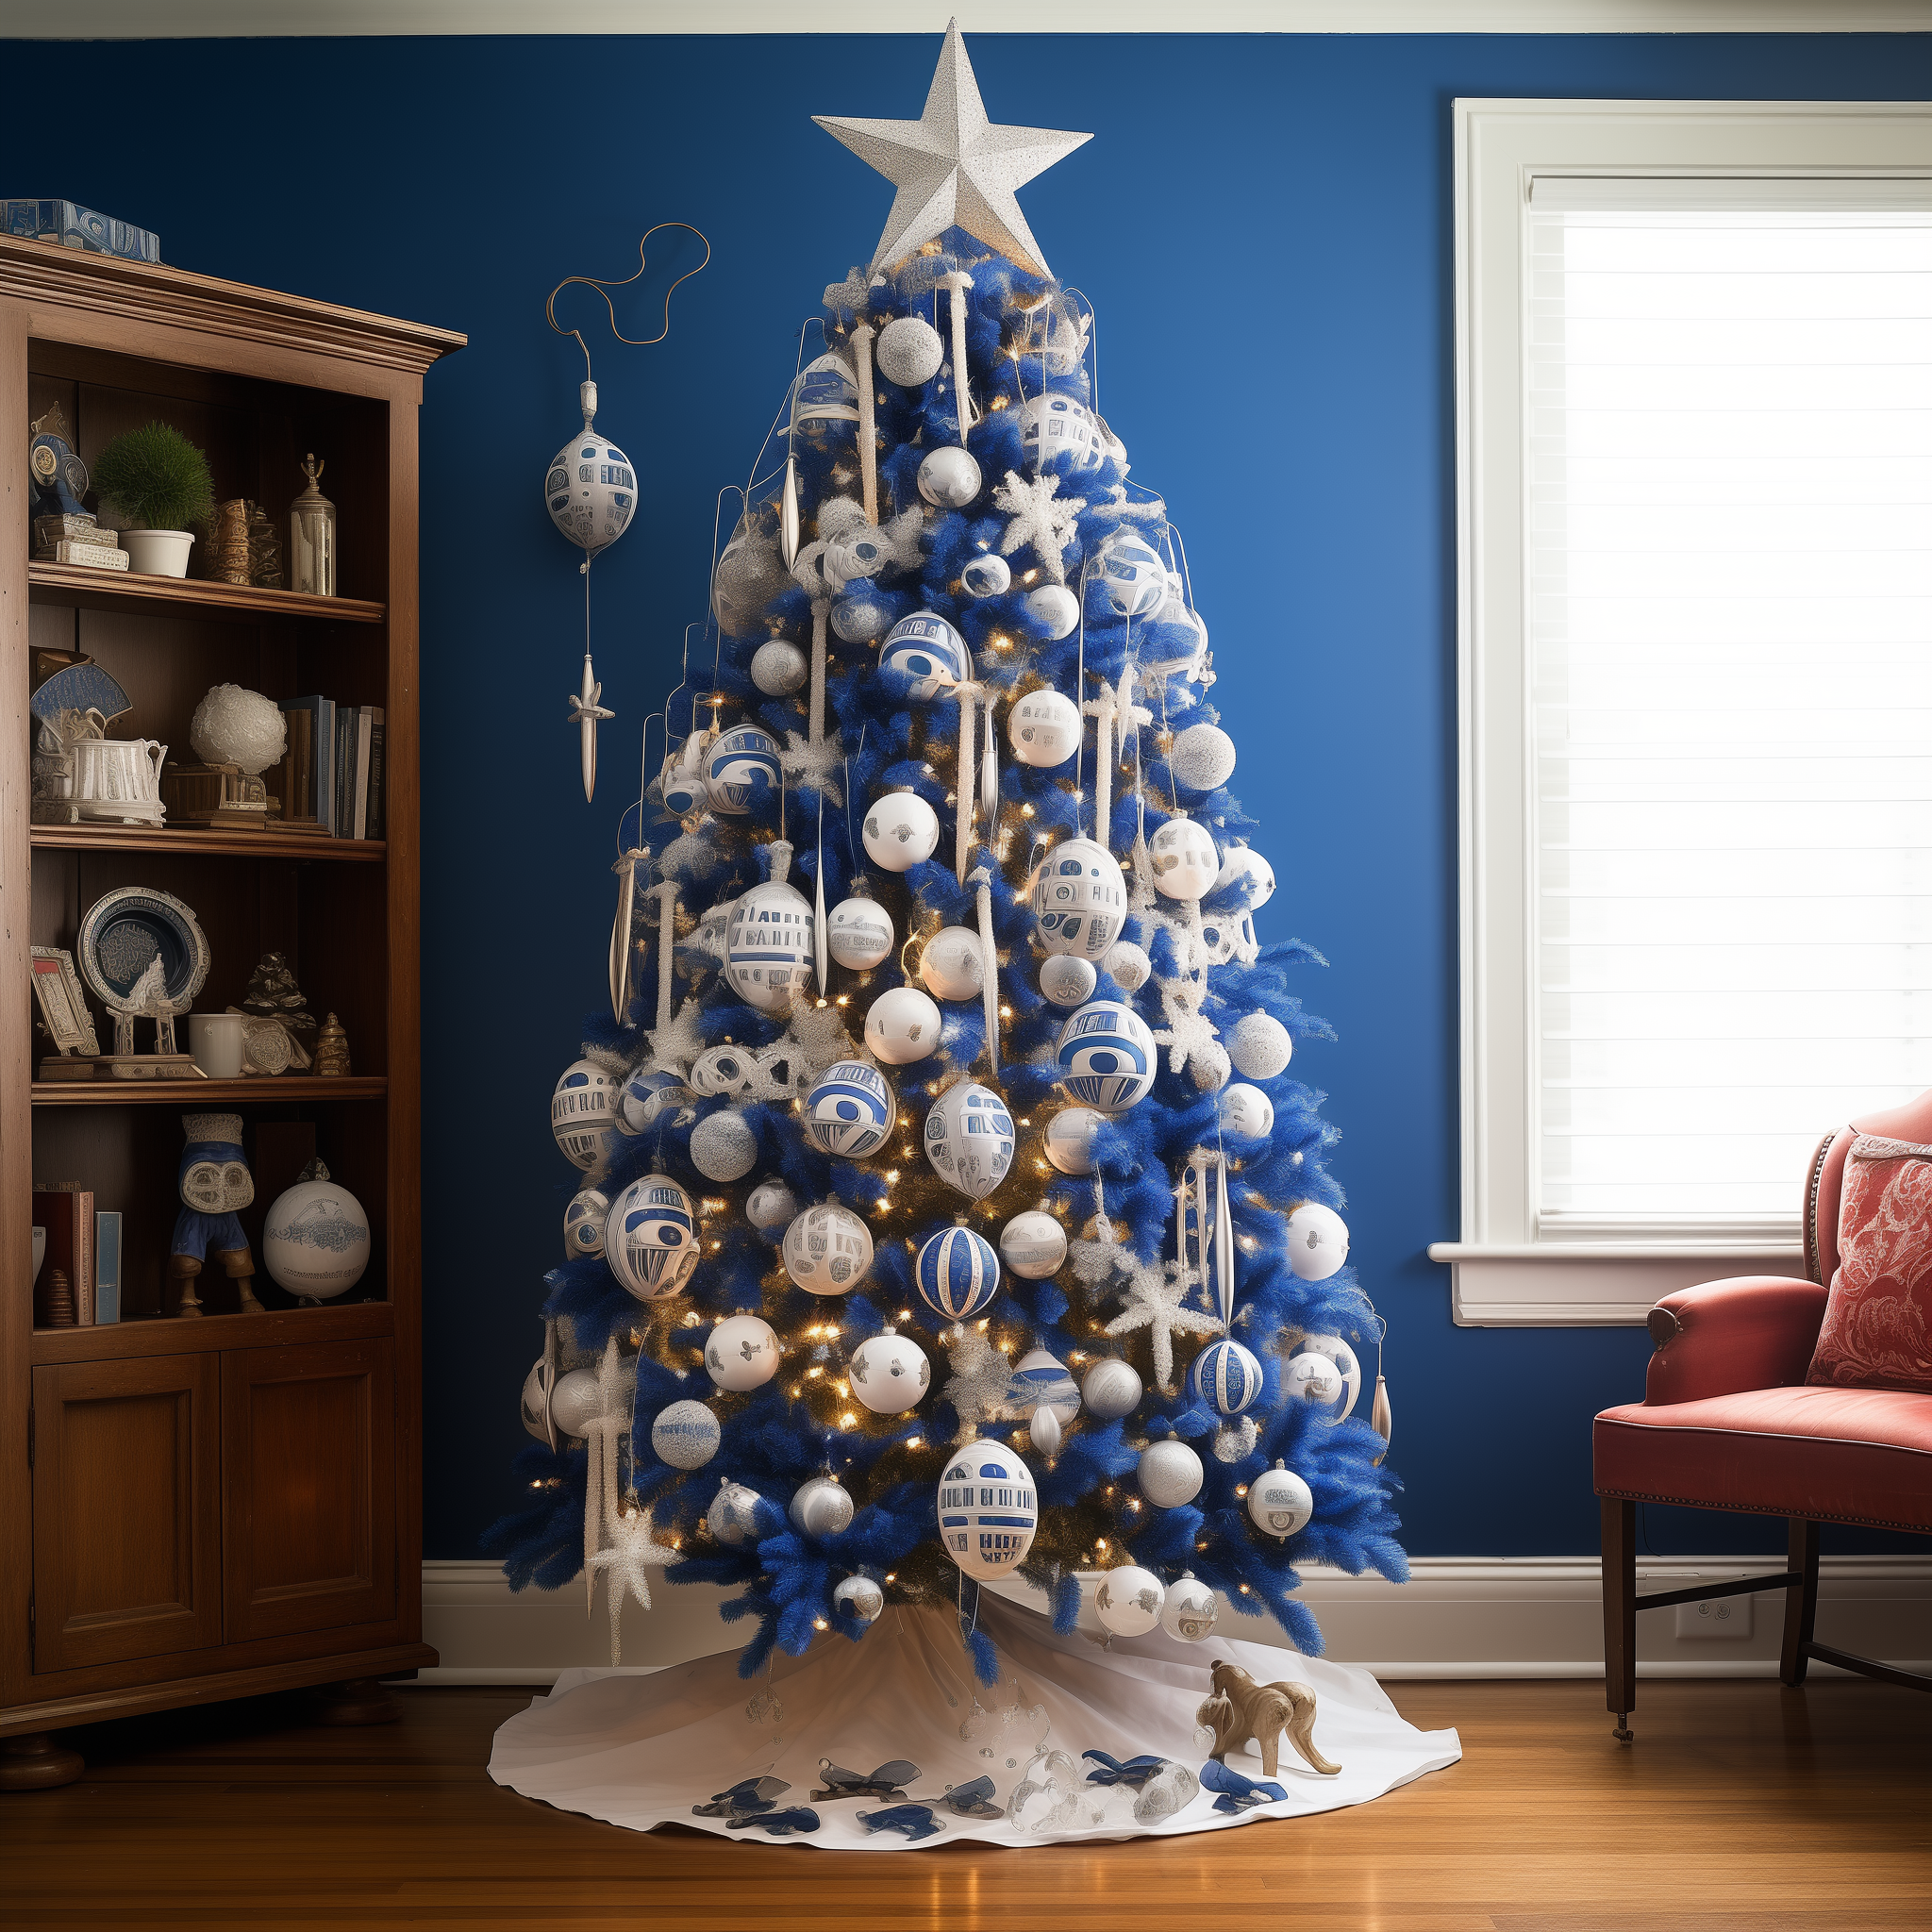 A blue Christmas tree covered in various bulb ornaments and icicle-like decorations with a star on top